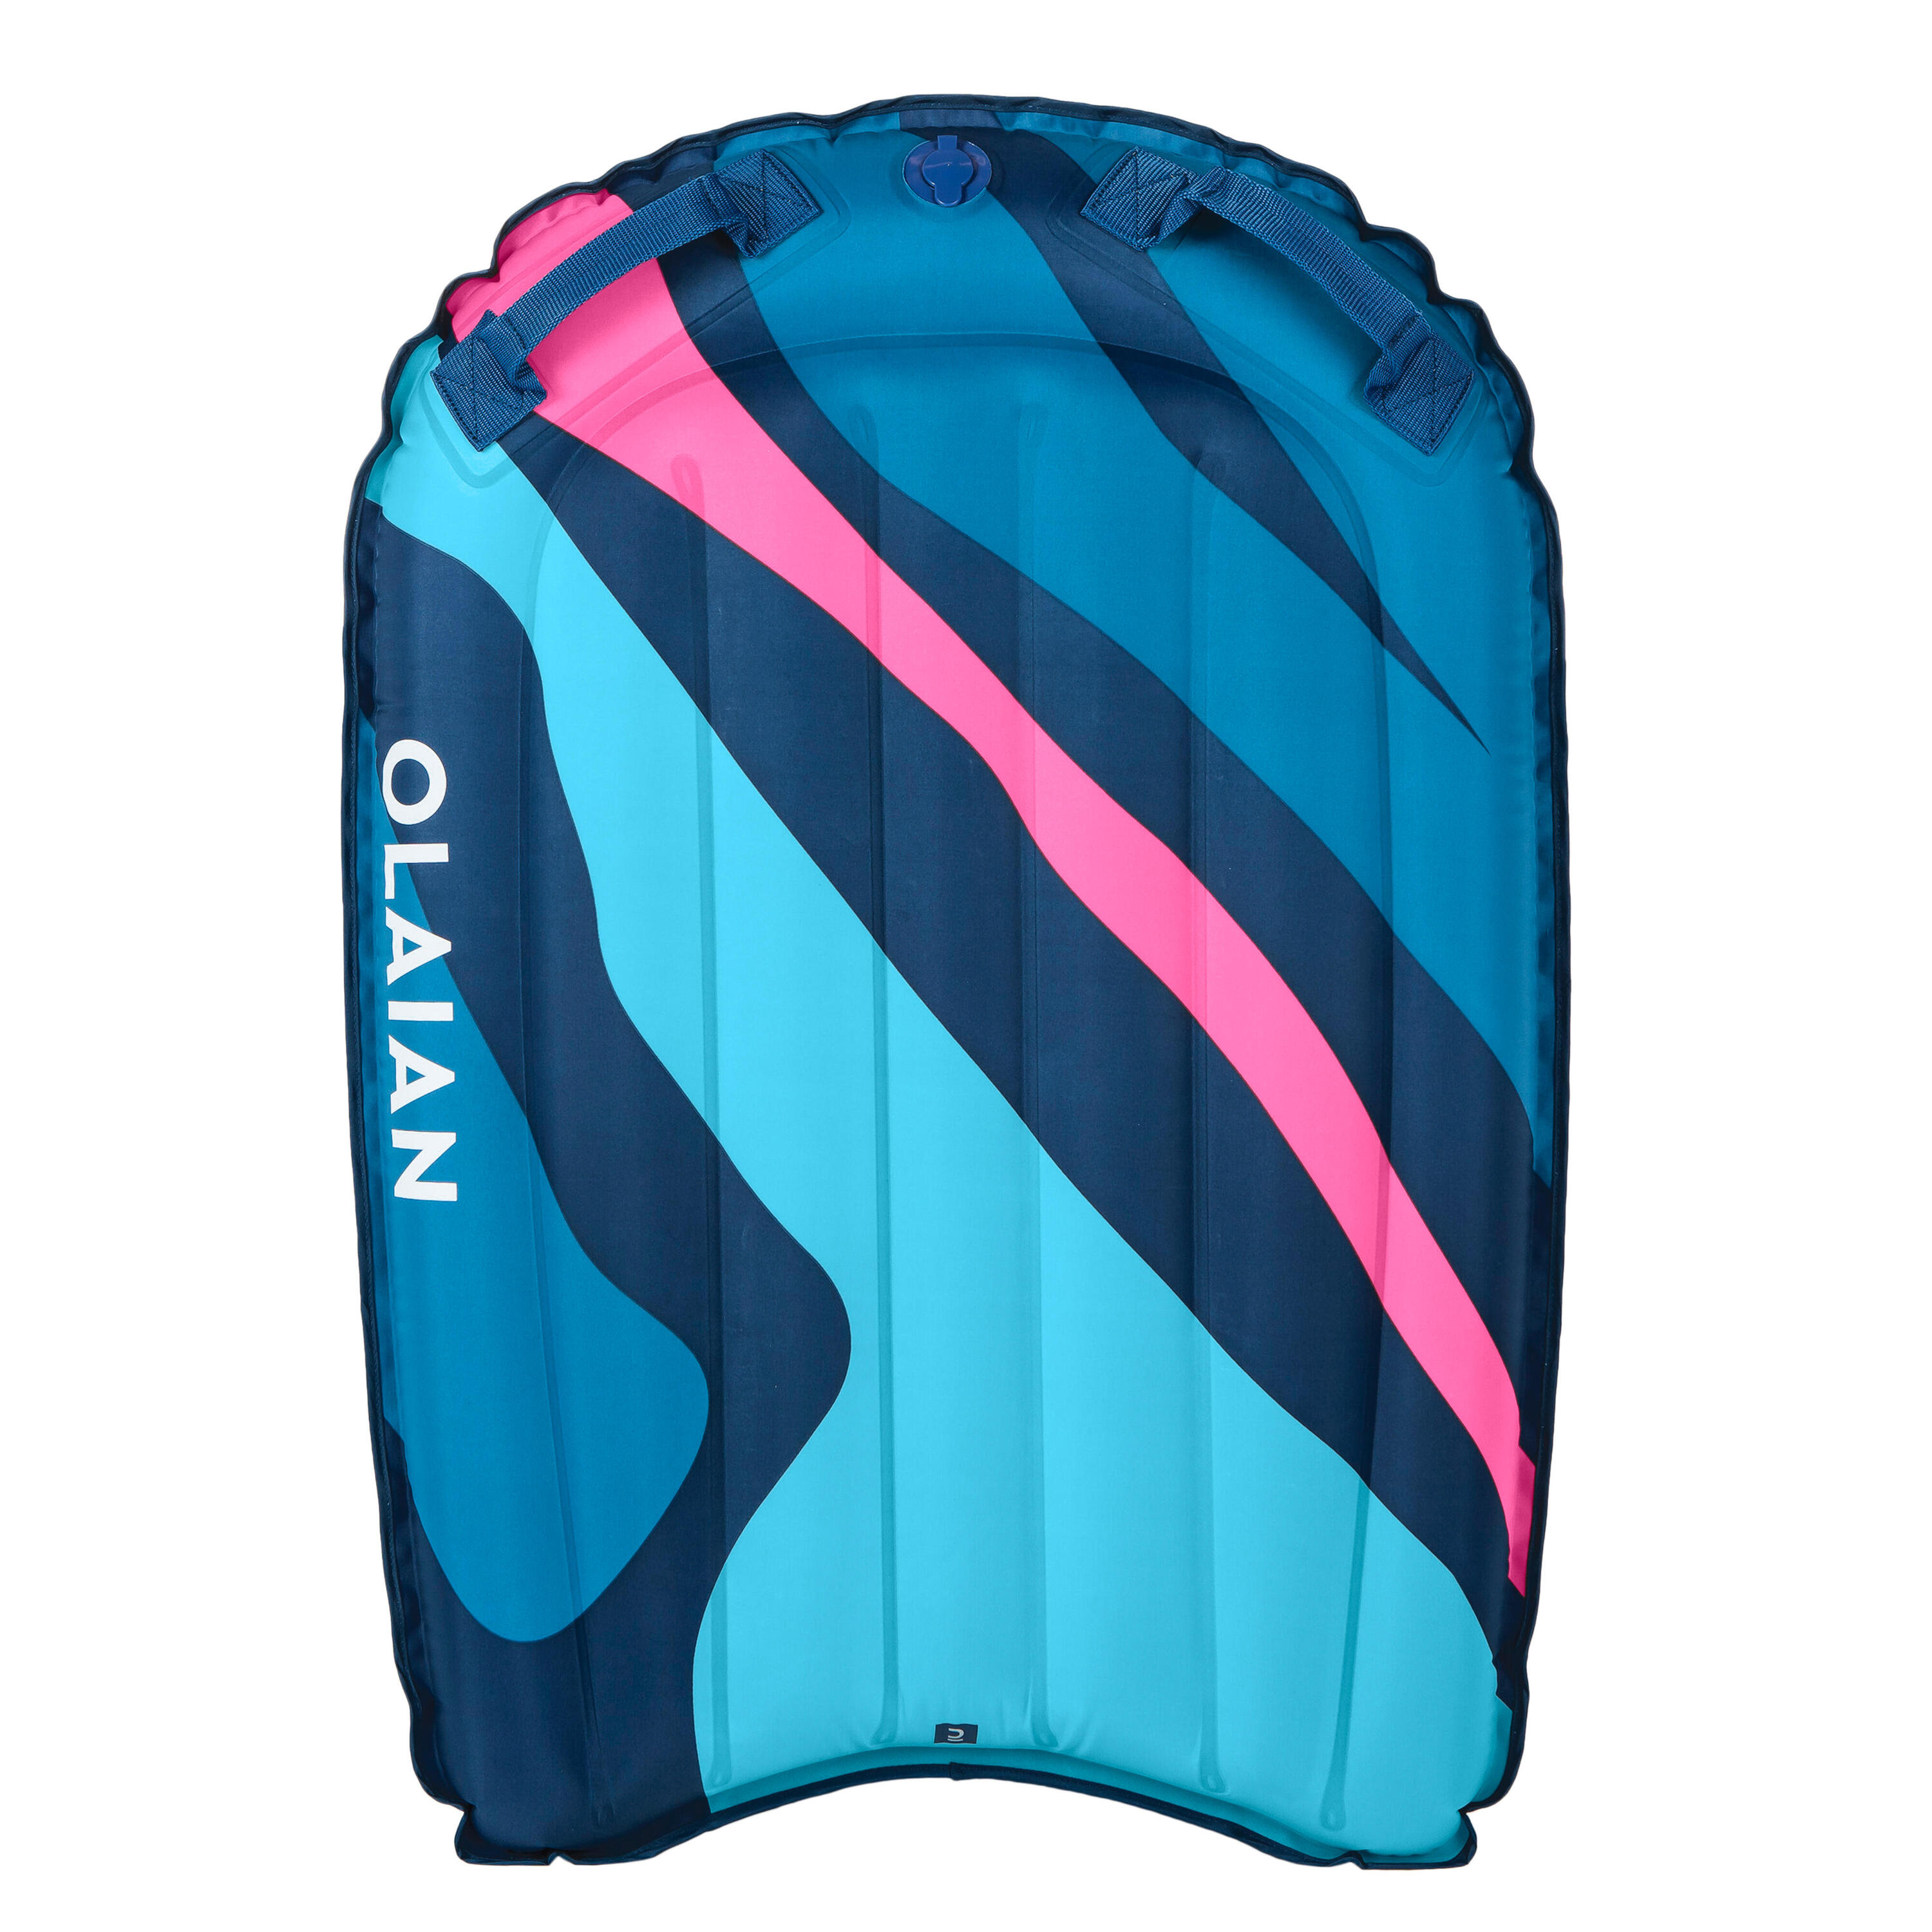 BEGINNER INFLATABLE BODYBOARD - COMPACT CAMO BLUE PINK (25-90 KG) 2/9